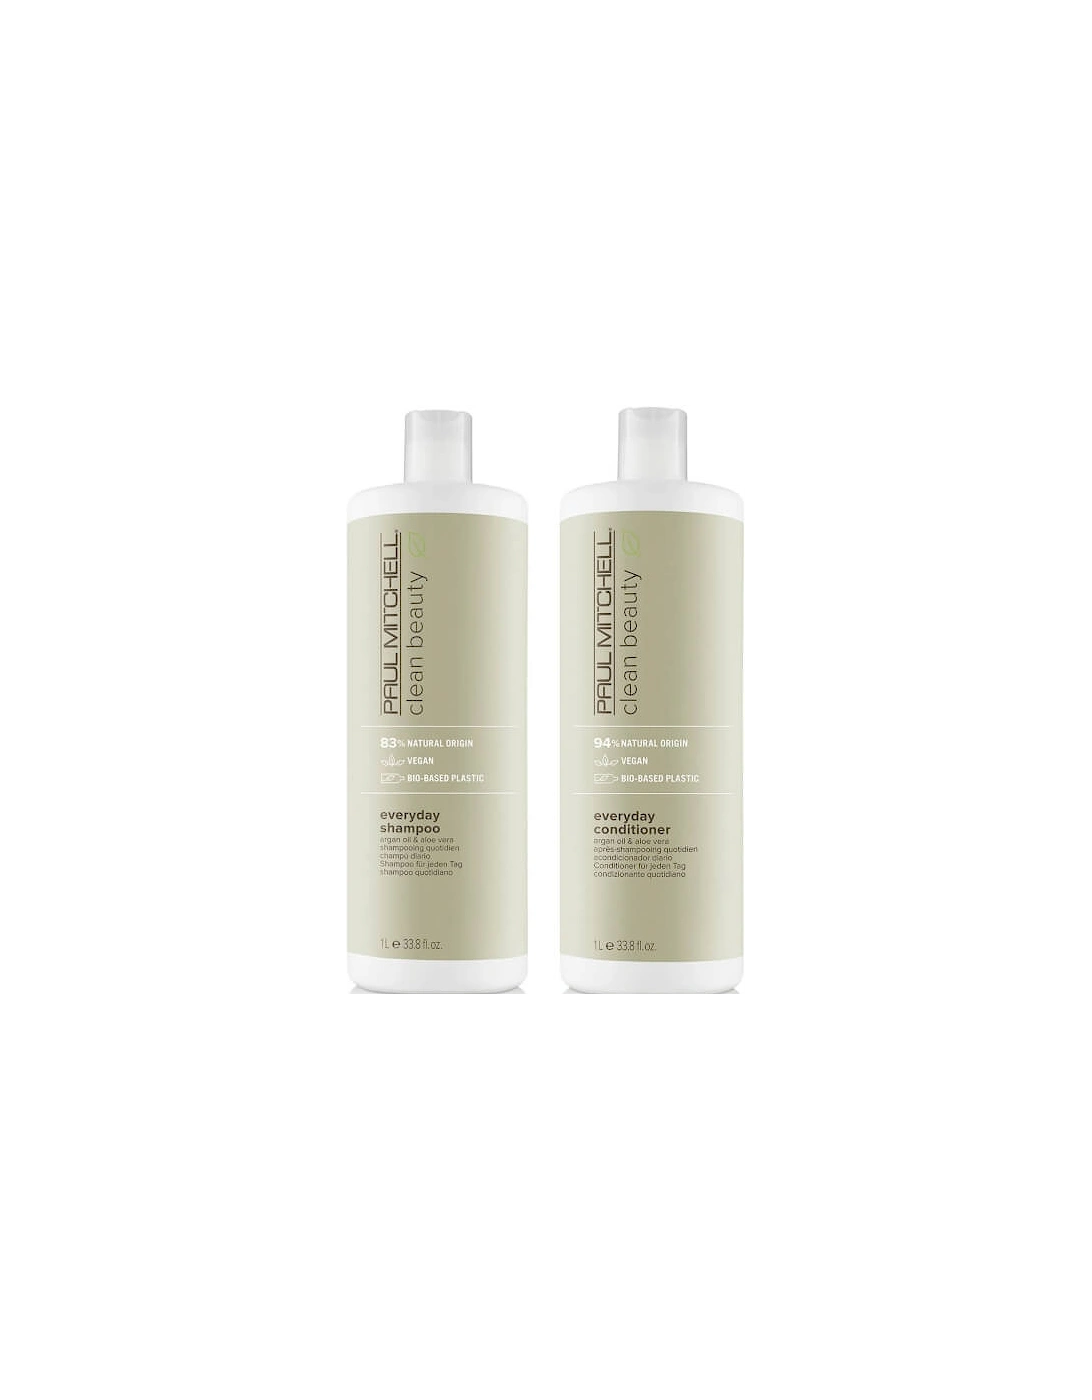 Clean Beauty Everyday Shampoo and Conditioner Supersize Set, 2 of 1